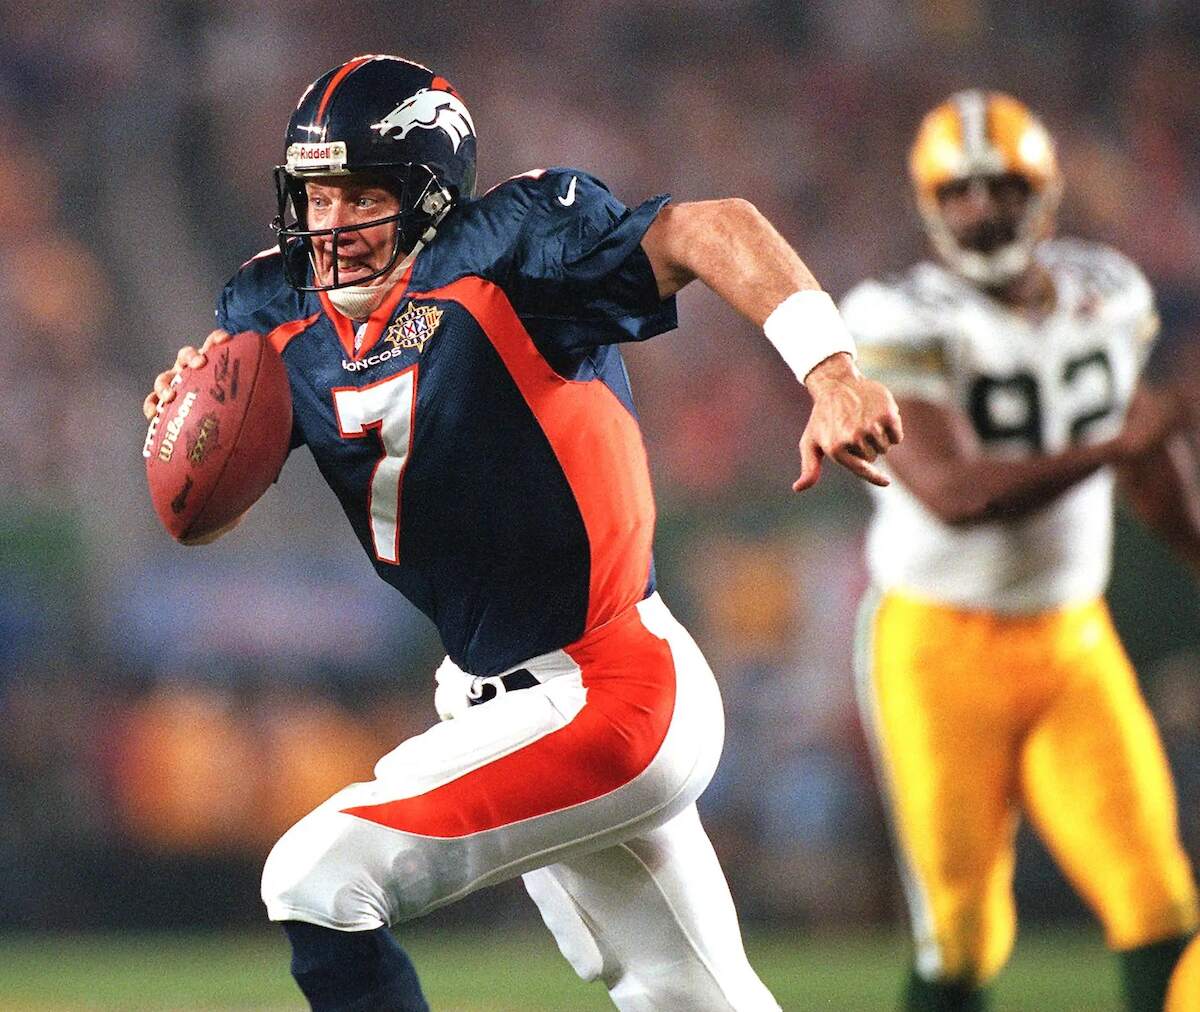 Denver Broncos quarterback John Elway scrambles for an eight-yard gain in the second half of Super Bowl XXXII against the Green Bay Packers